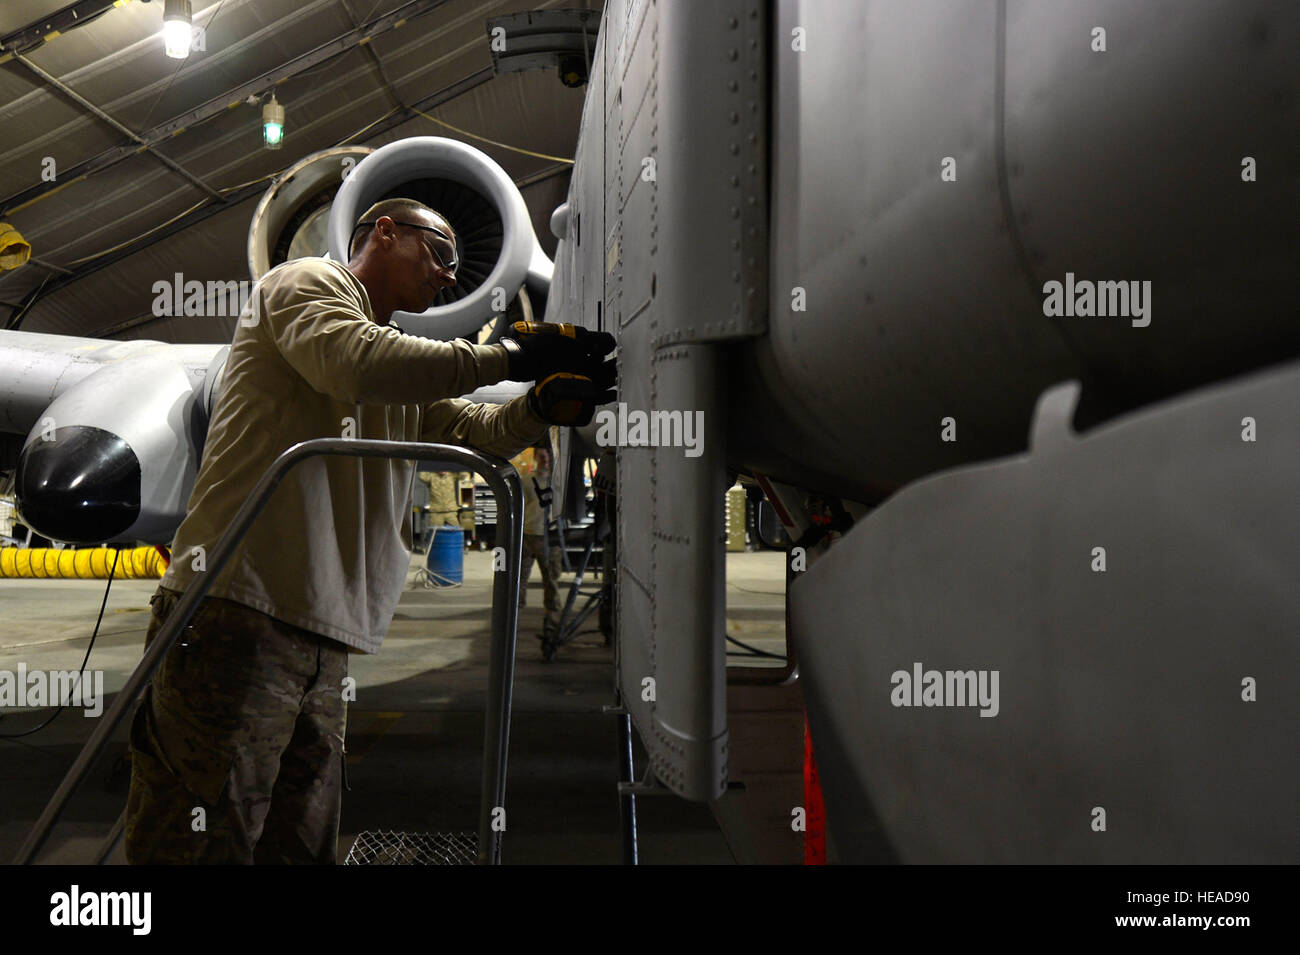 U.S. Air Force Senior Airman Jason Stanley, 455th Expeditionary Maintenance Squadron A-10 Thunderbolt II faze technician, performs maintenance on an A-10 Thunderbolt II at Bagram Air Field, Afghanistan, Dec. 30, 2013. The A-10 Thunderbolt II provides close-air support for troops on the ground. Stanley is deployed from the 476th Fighter Group from Moody Air Force Base, Ga., and a native of Canton, Ga.  Senior Airman Kayla Newman Stock Photo